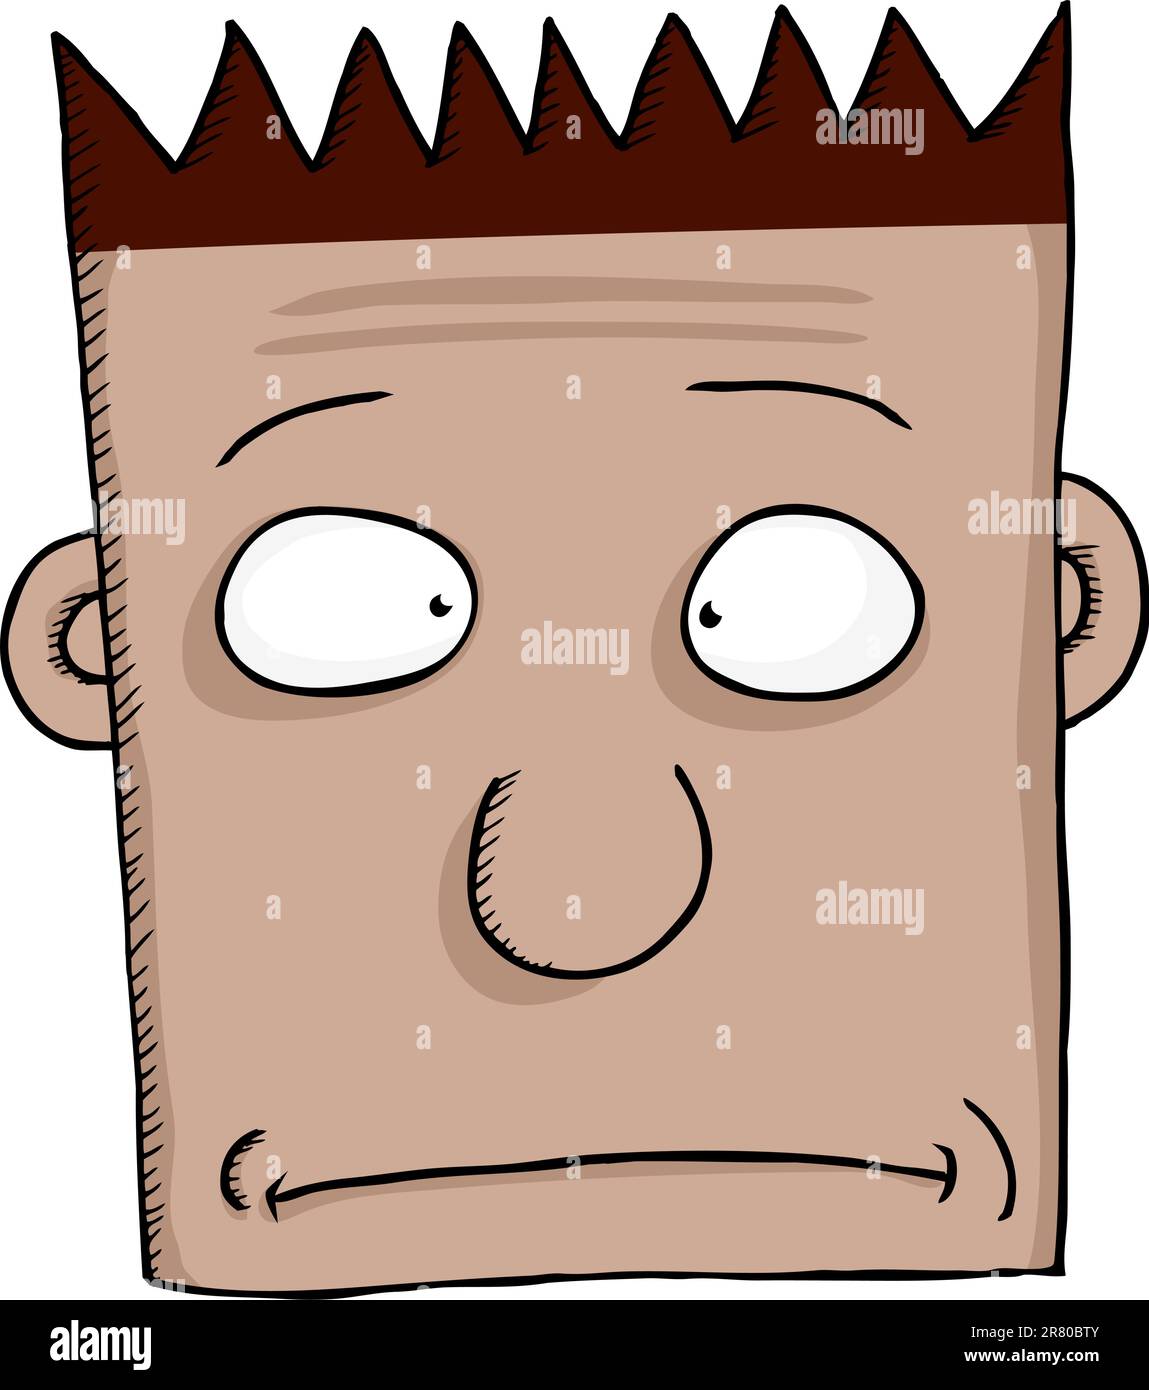 Cartoon of worried person with spiked hair over white background Stock Vector